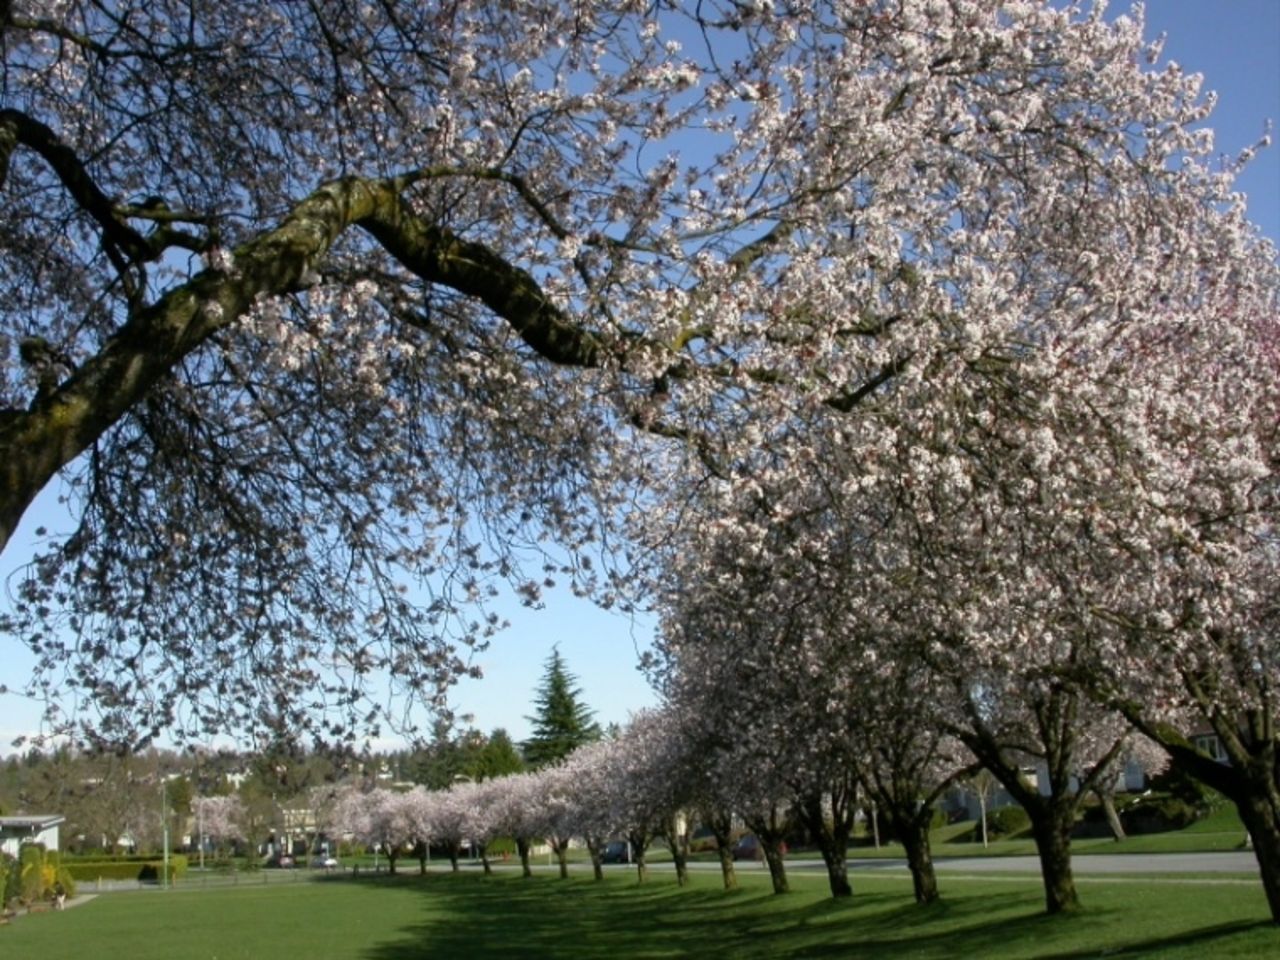 Vancouver has more than 40,000 cherry trees gracing its streets in neighborhoods such as Arbutus Ridge.